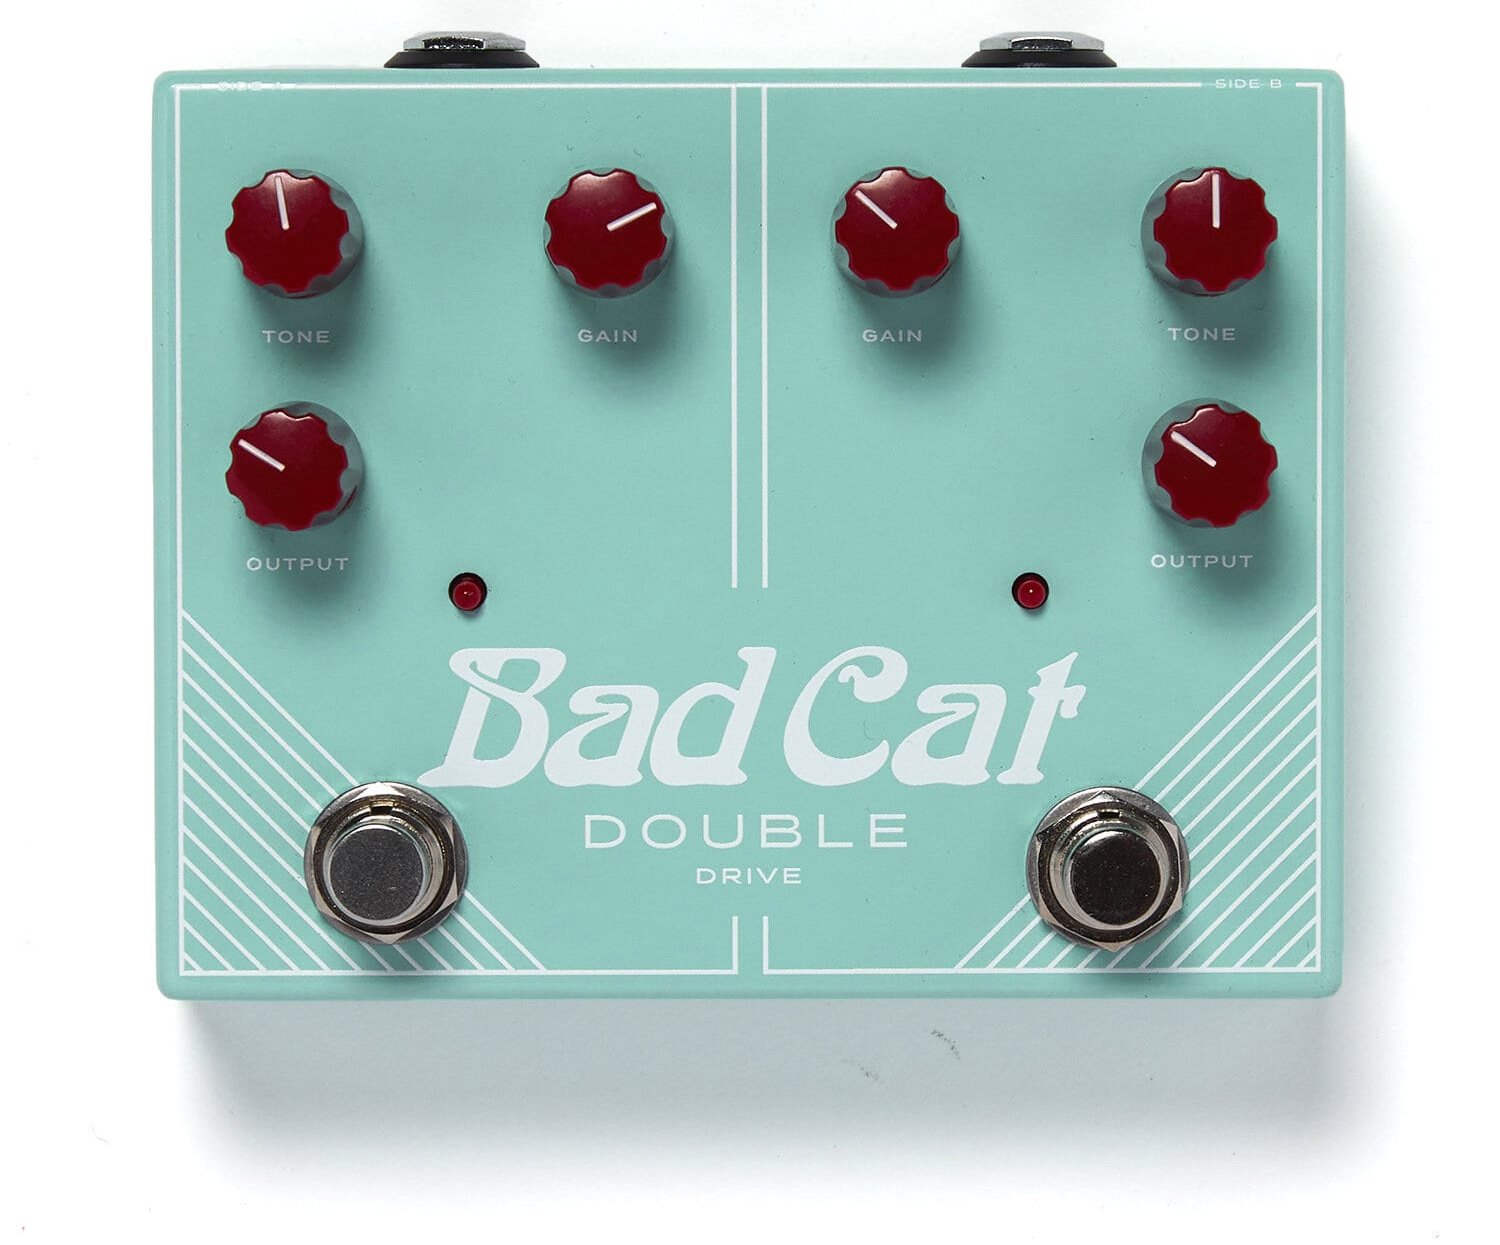 Bad Cat Double Drive dual channel overdrive